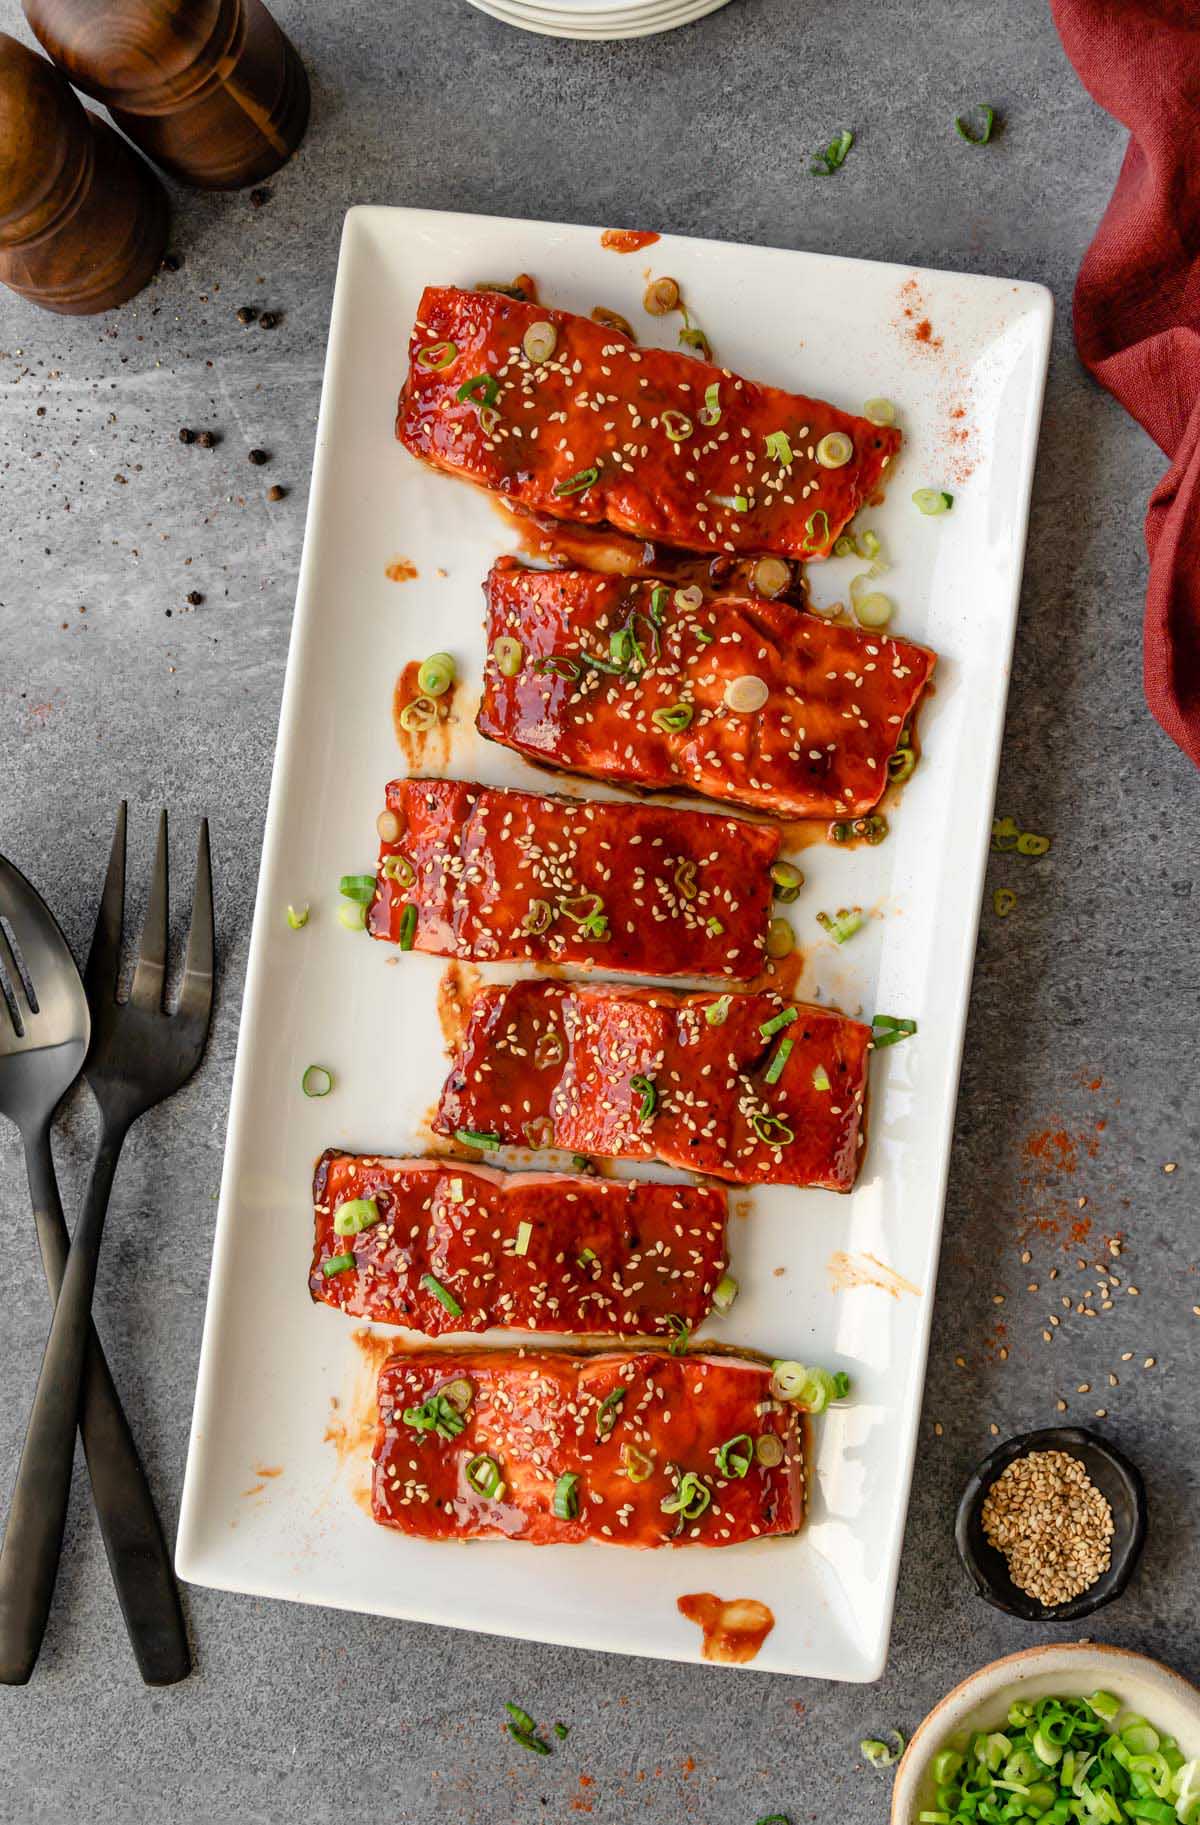 6 Gochujang Salmon fillets on a white platter with serving utensils, green onion, and plates on the side.